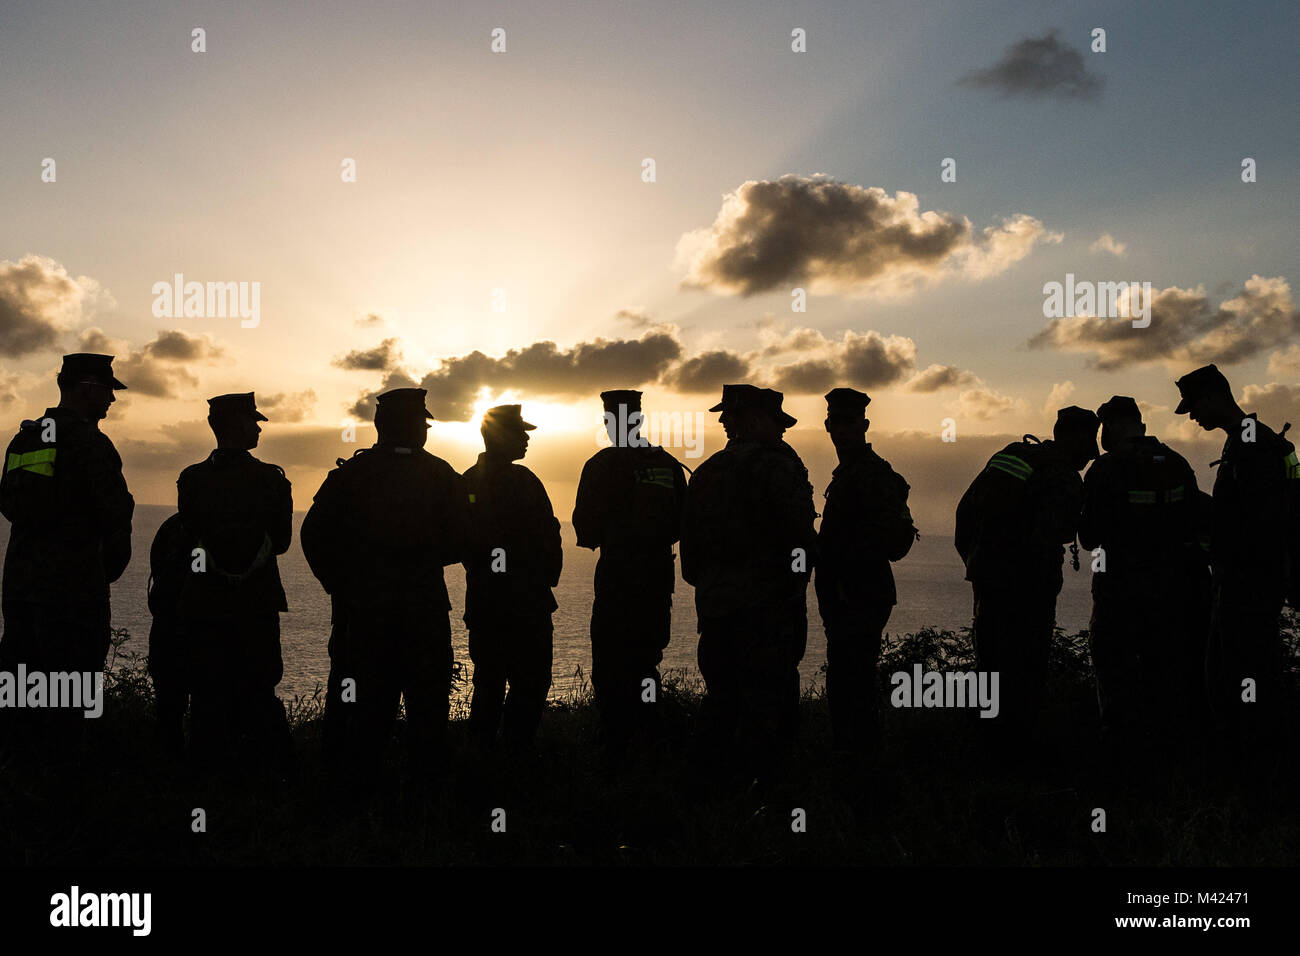 U.S. Marines assigned to Class 3-18 of the Marine Aircraft Group 24 Corporal's Course, watch the sunrise from the top Ulupa'u Crater prior to flying back to Marine Corps Air Station, Kaneohe Bay, Feb. 9, 2018. The course's graduation commenced after a hike across the crater. (U.S. Marine Corps Photo by Sgt. Aaron S. Patterson) Stock Photo